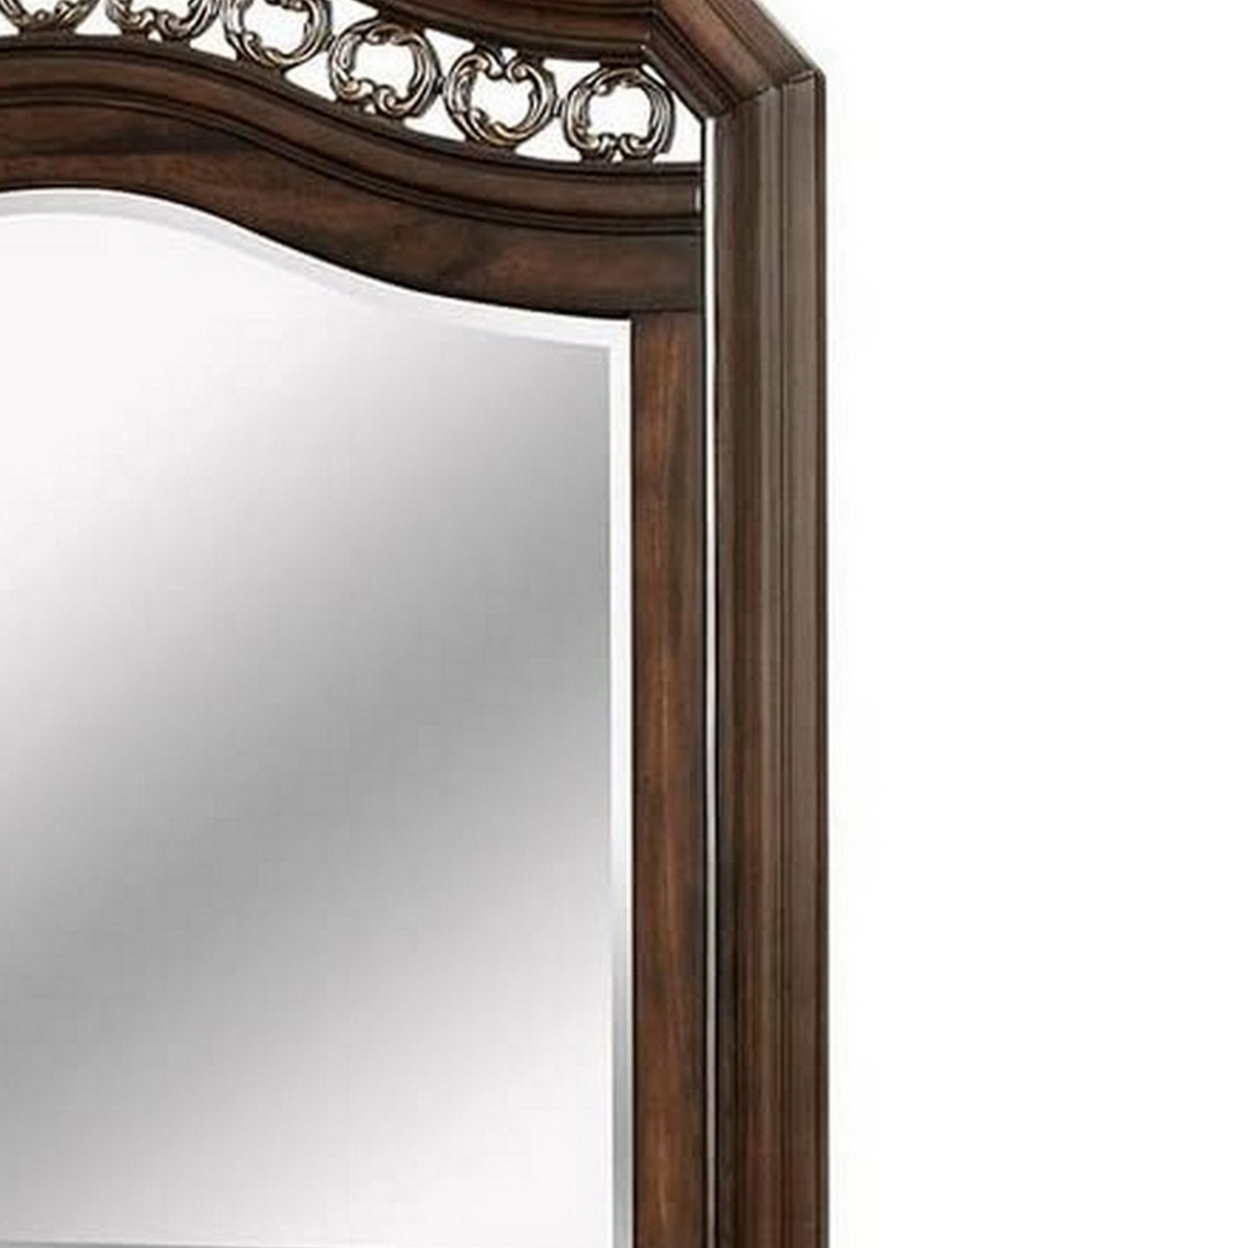 Wall Mirror With Camelback Top Wooden Molded Frame, Espresso Brown- Saltoro Sherpi